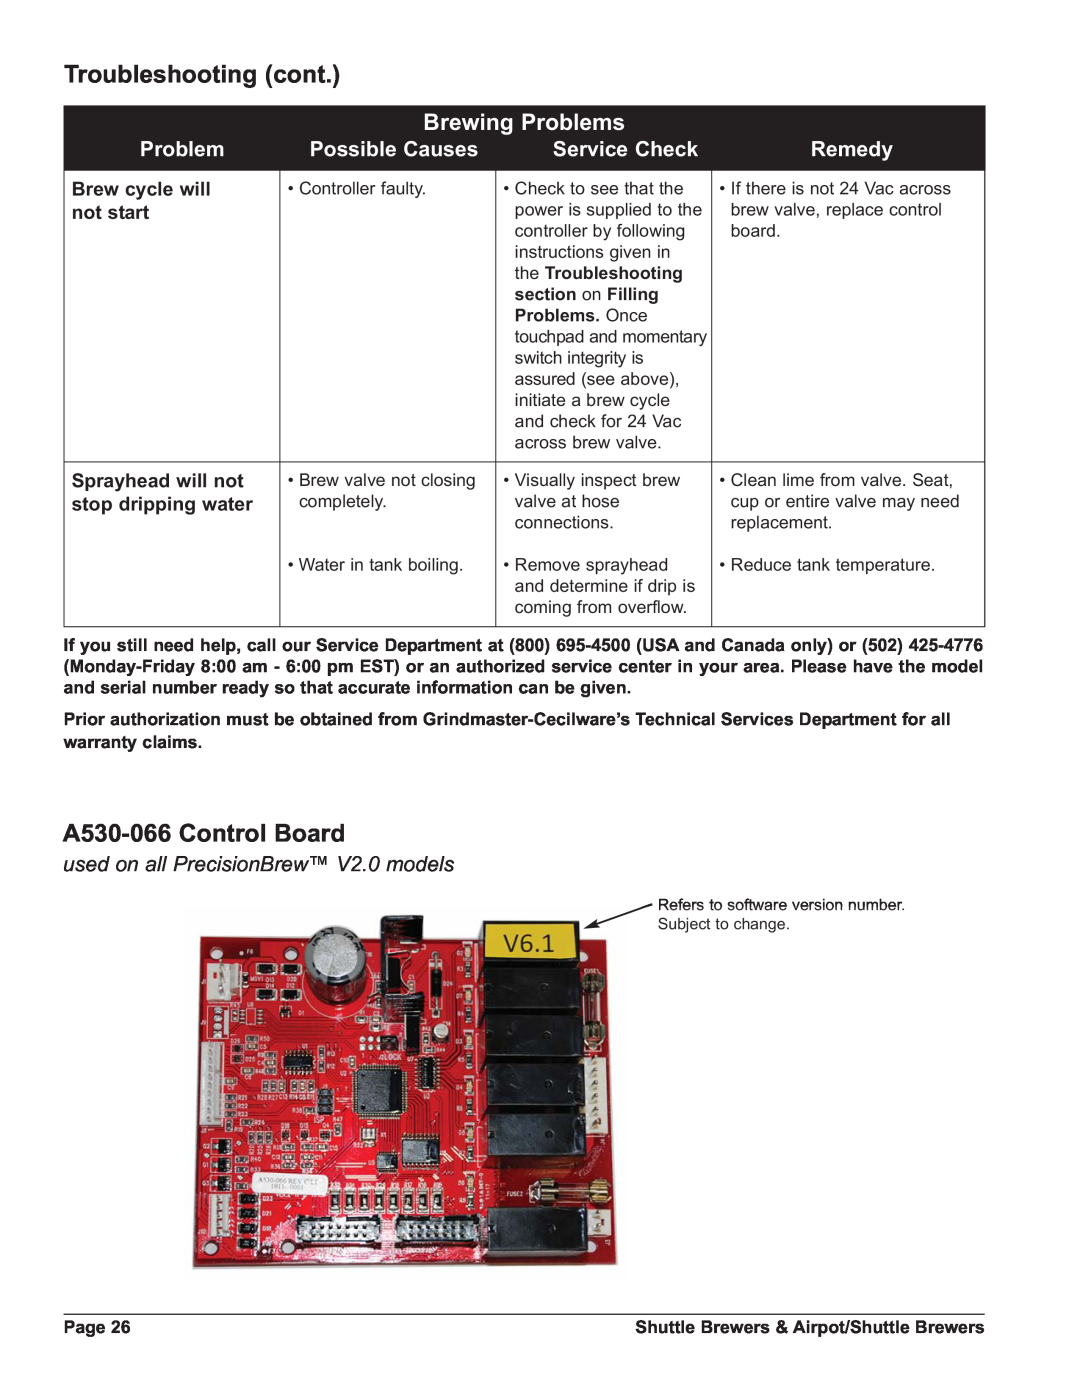 Grindmaster APBIC-430V2 A530-066 Control Board, Troubleshooting cont, Brewing Problems, Possible Causes, Service Check 